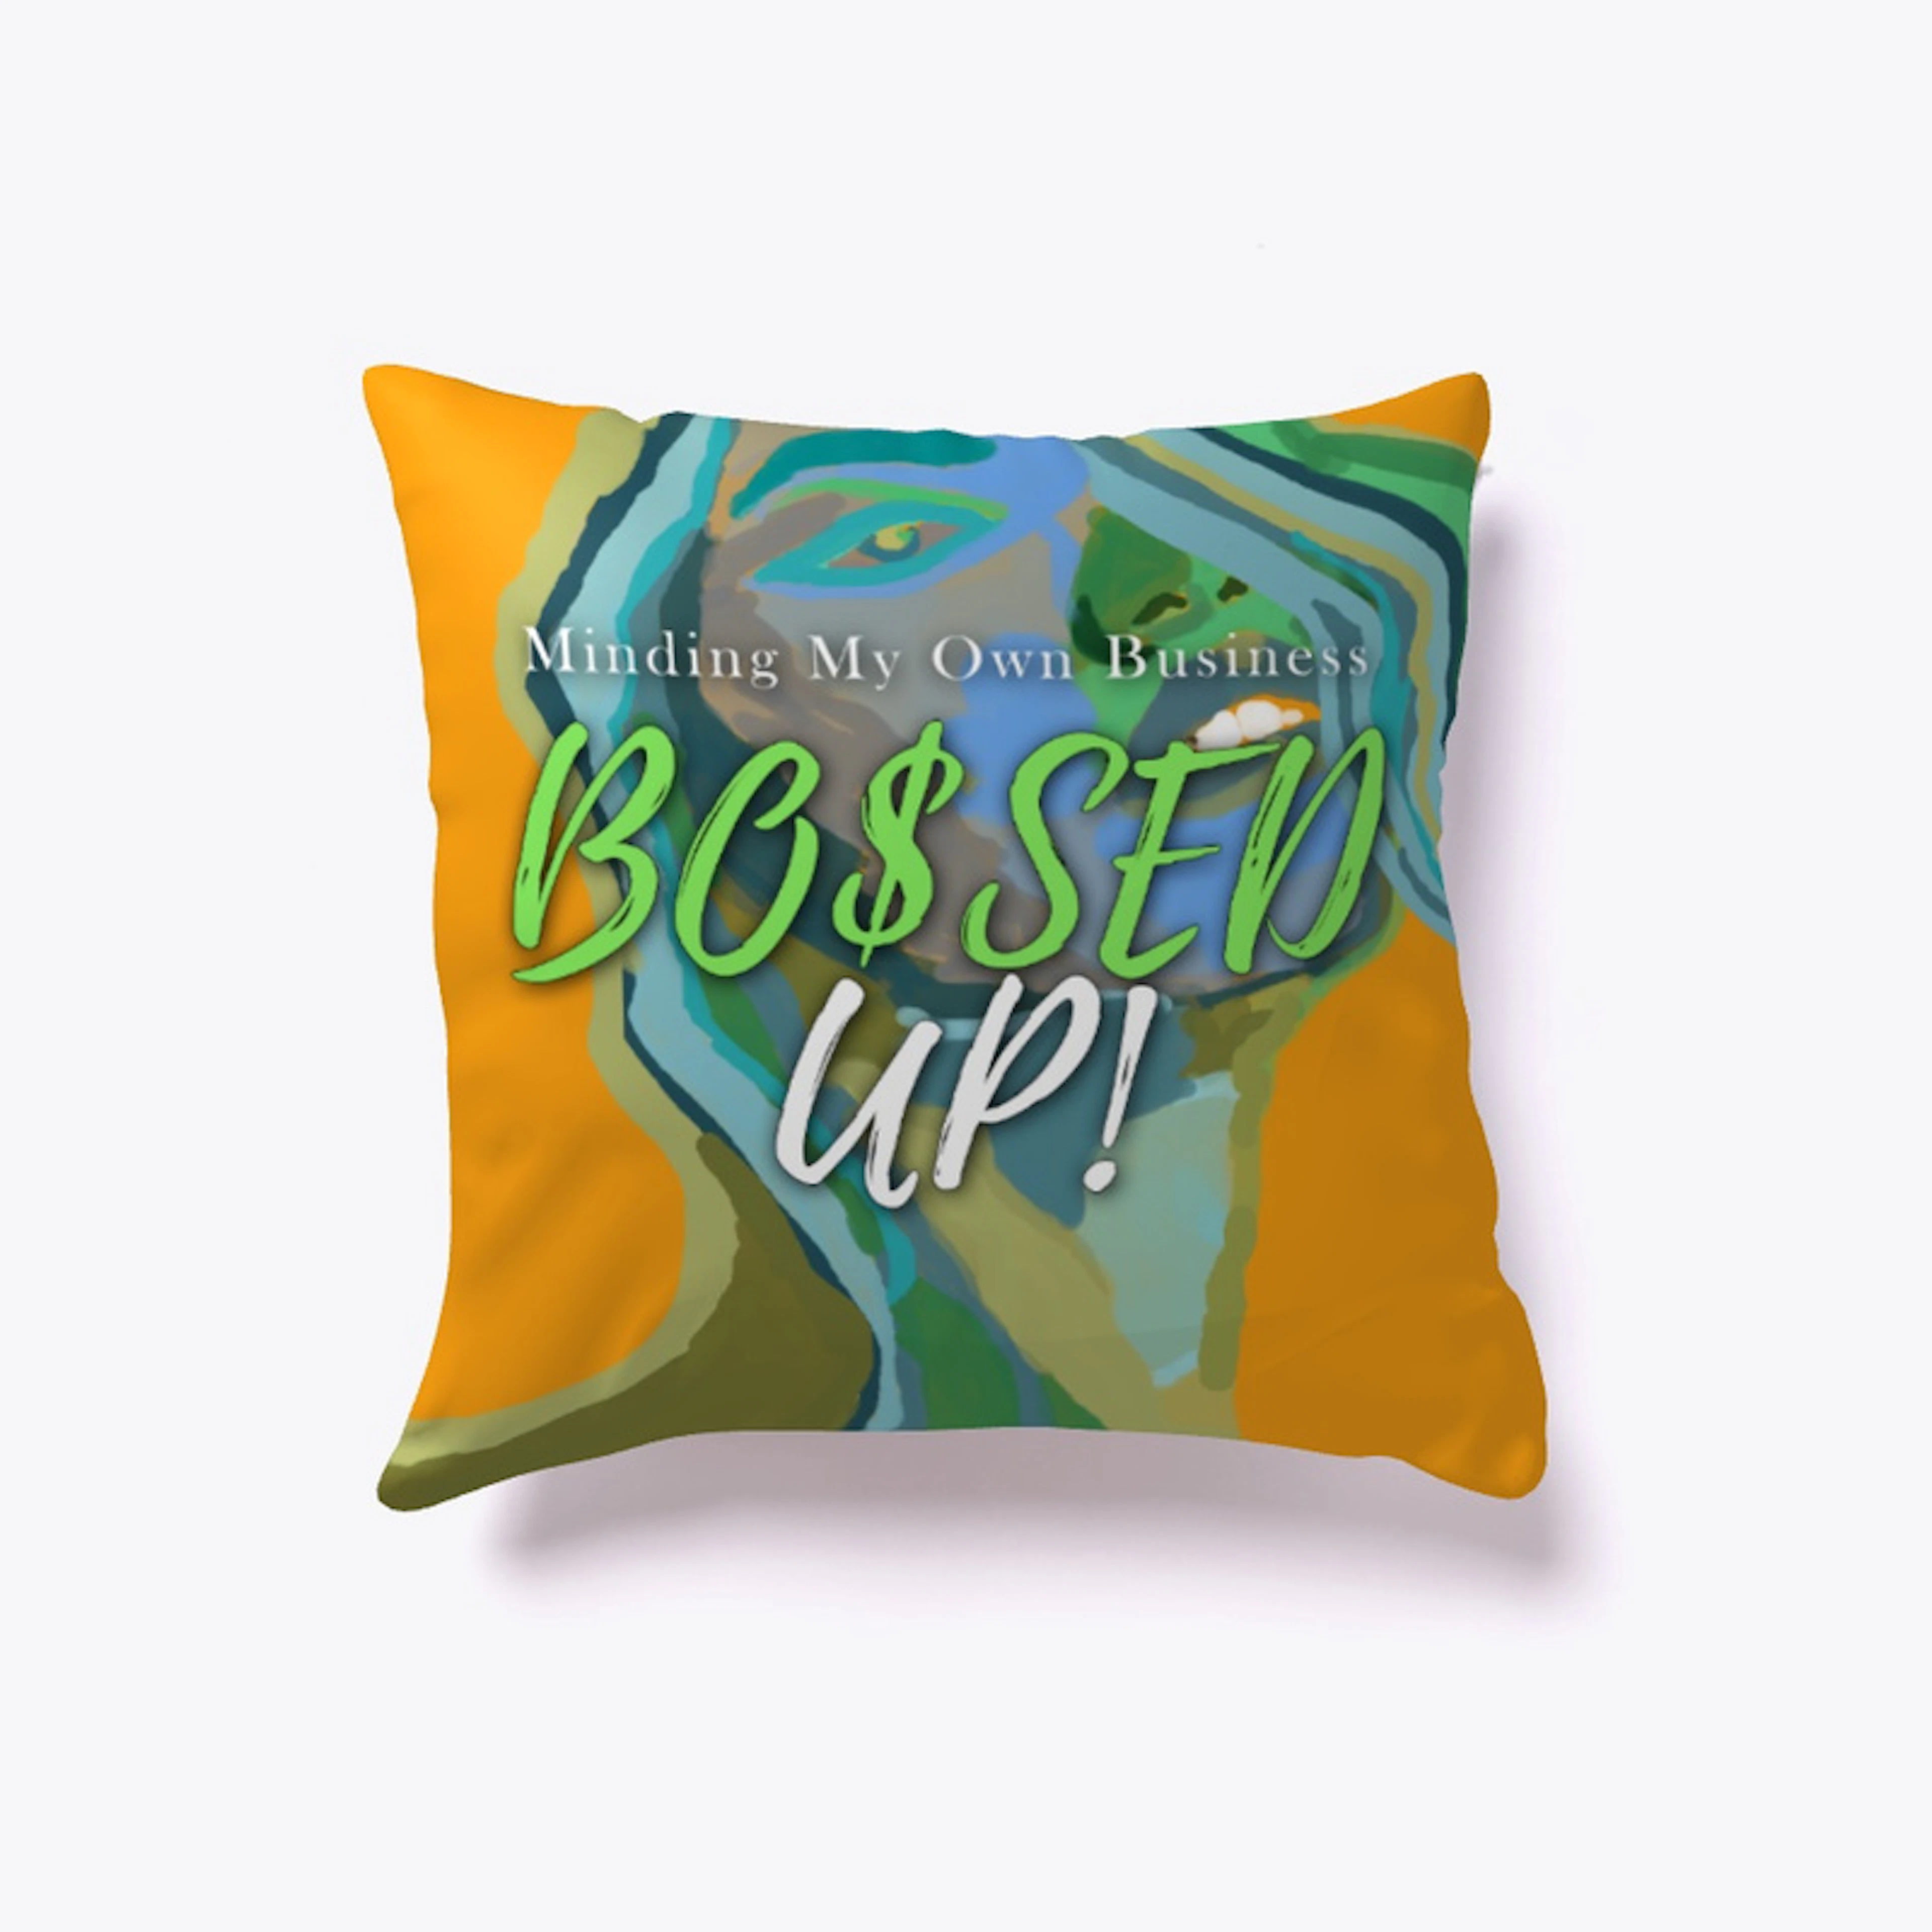 Minding My Own Business/Bossed Up-Pillow